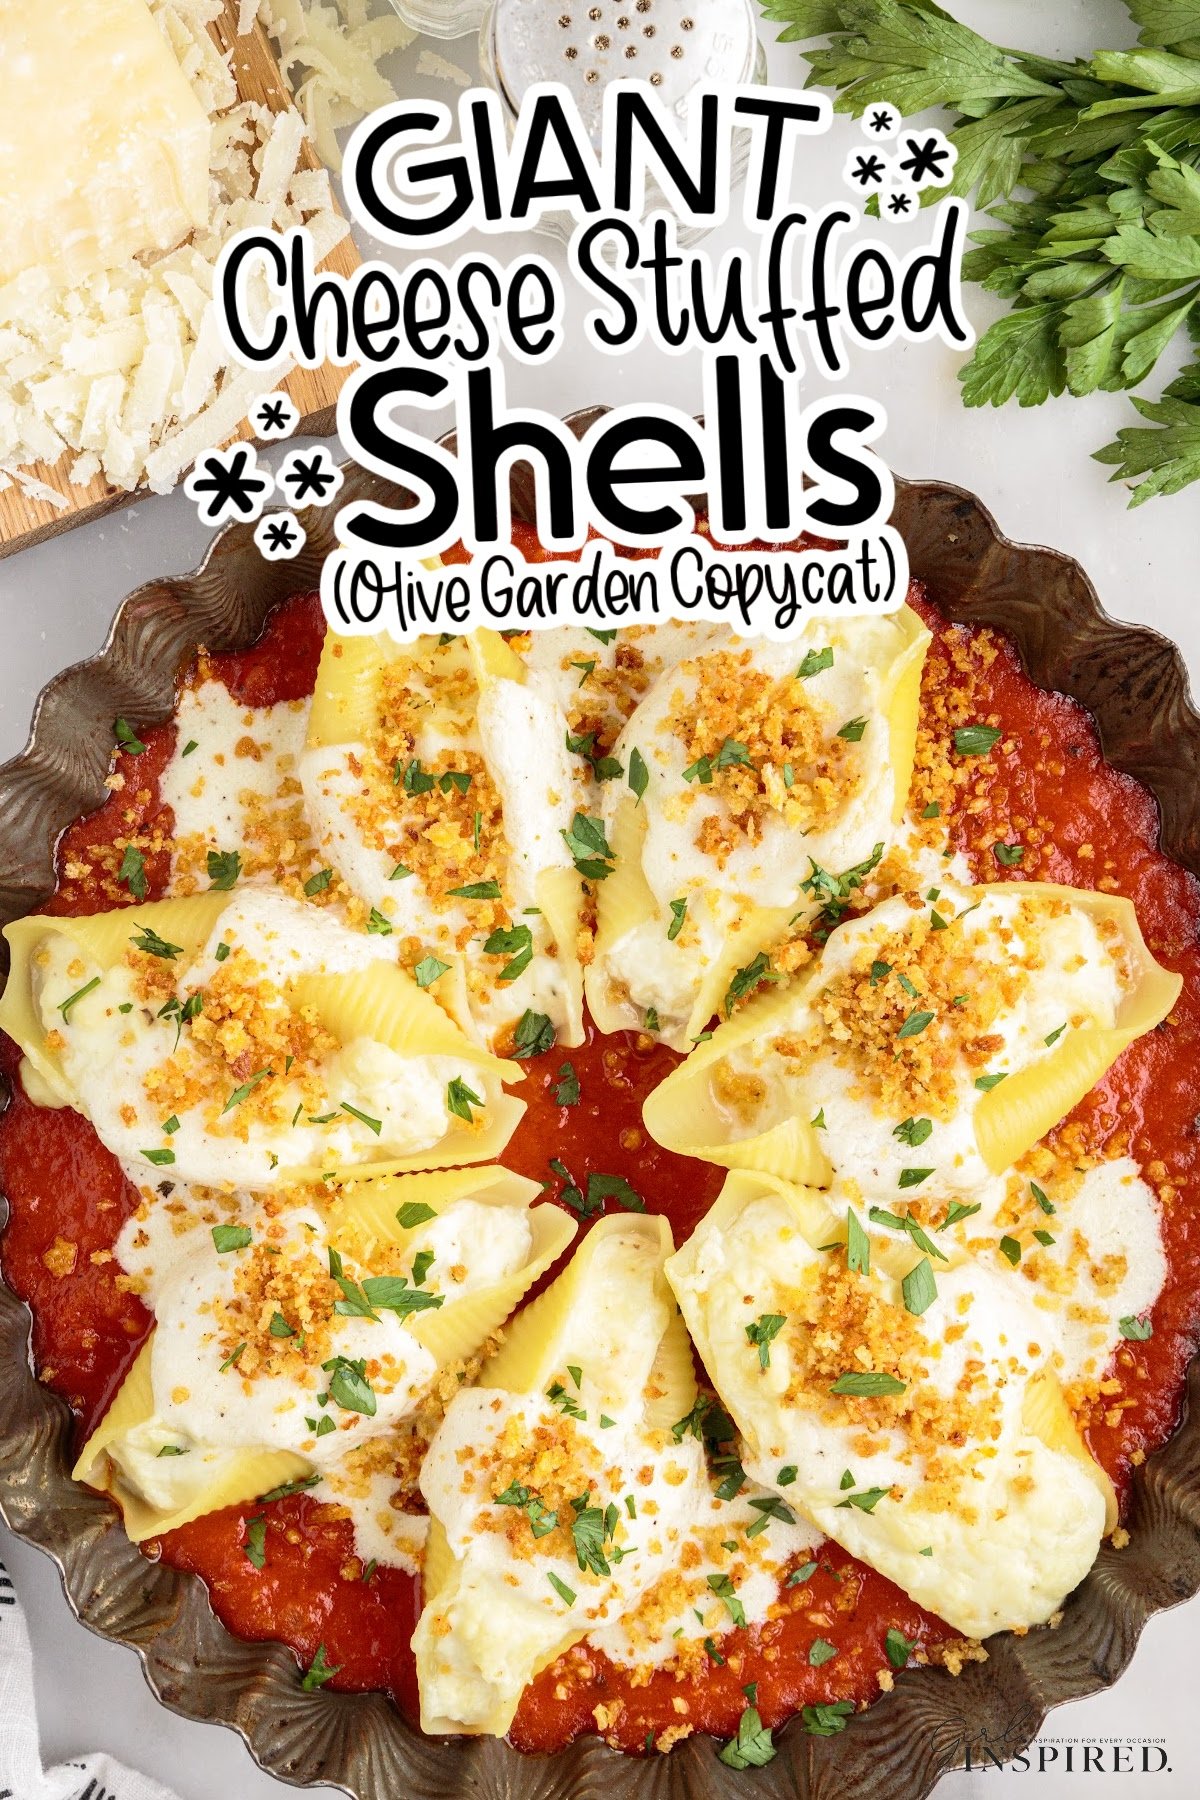 Giant Cheese Stuffed Shells olive garden copycat recipe is platted with shells in a marinara sauce, with text overlay.